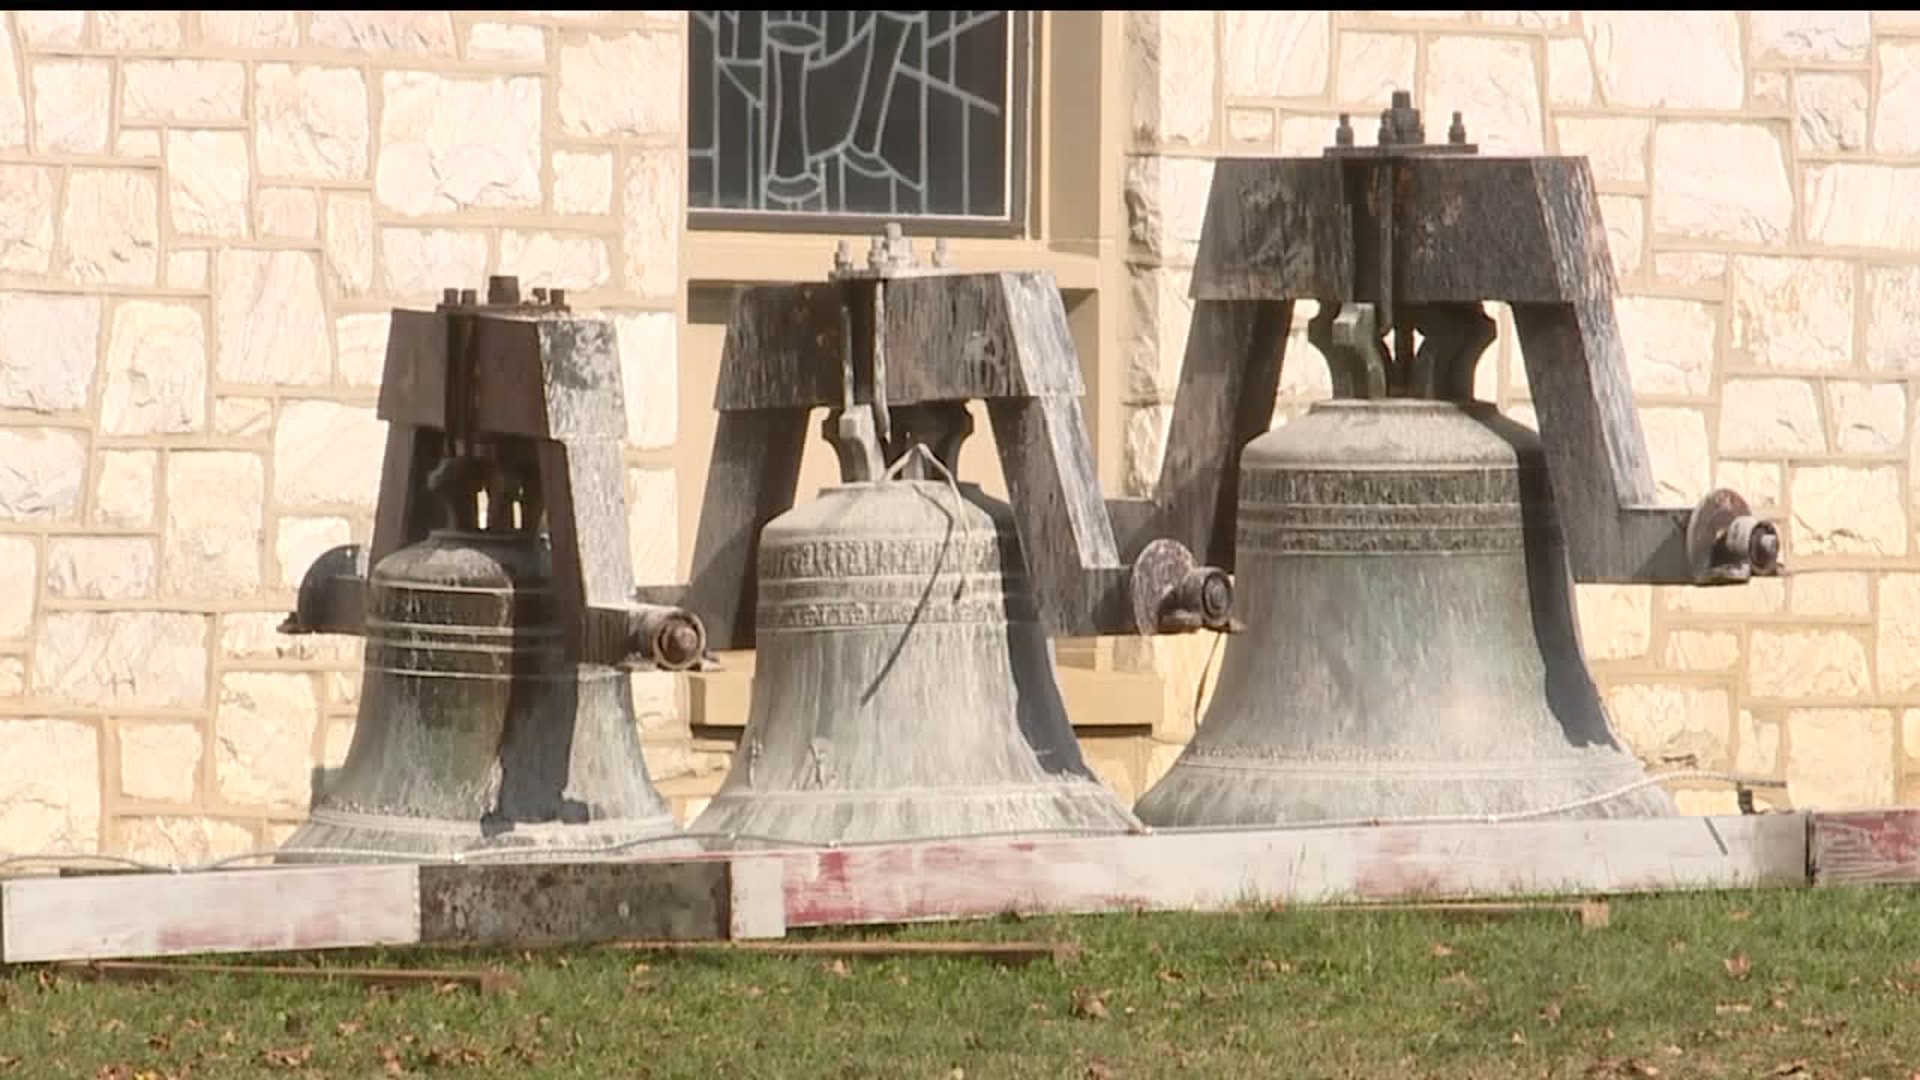 Members of Lebanon Co. church upset after bell tower and cross are demolished